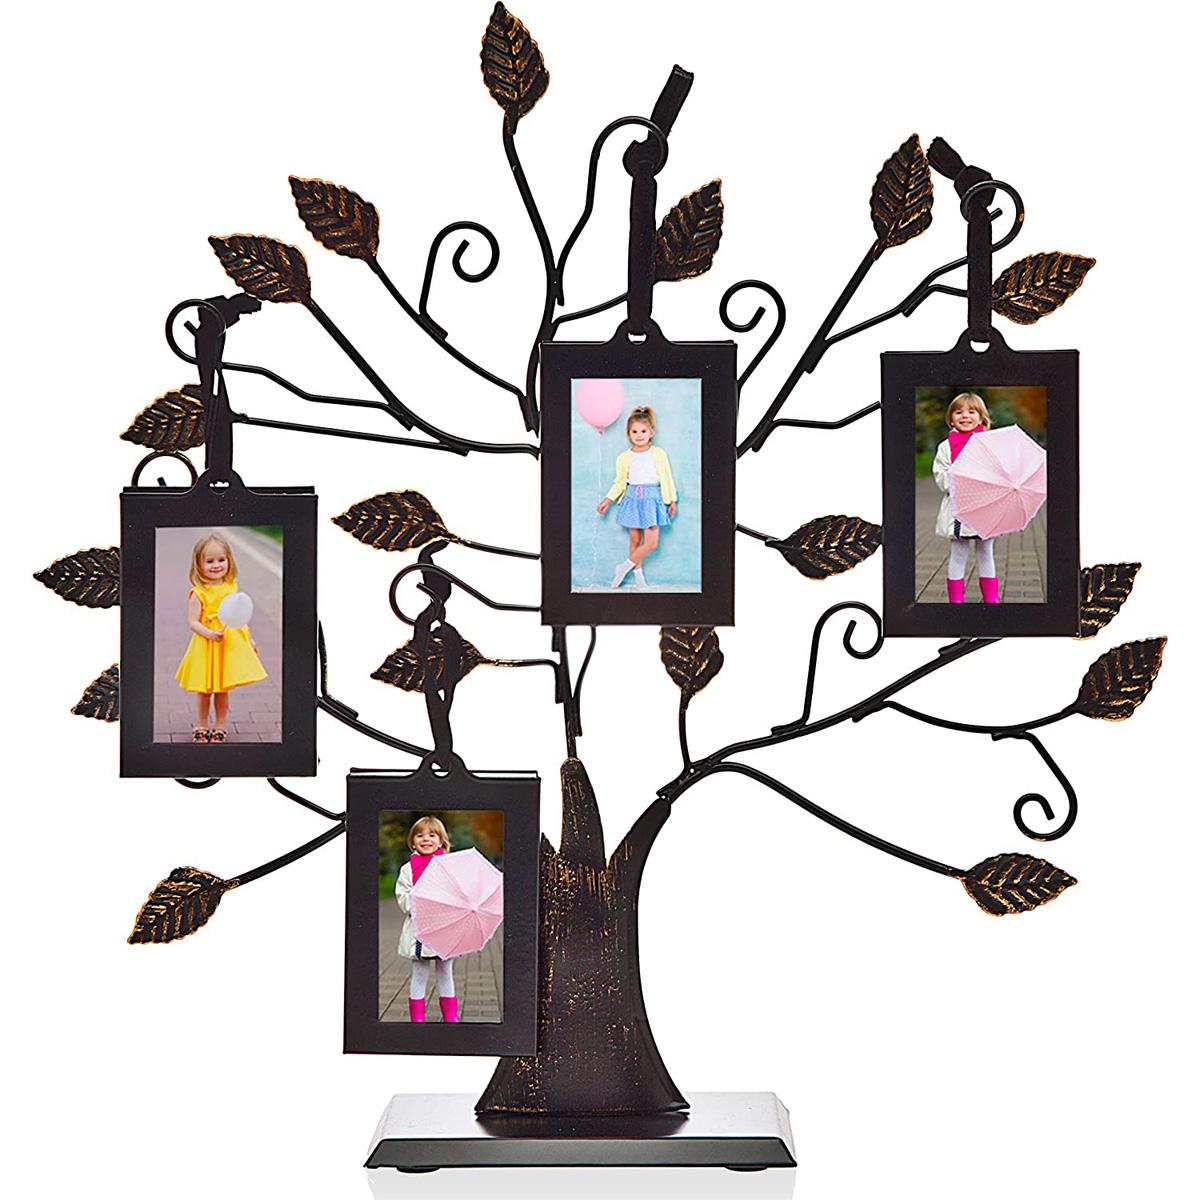 Philip Whitney Family Tree Picture Frame for $14.97